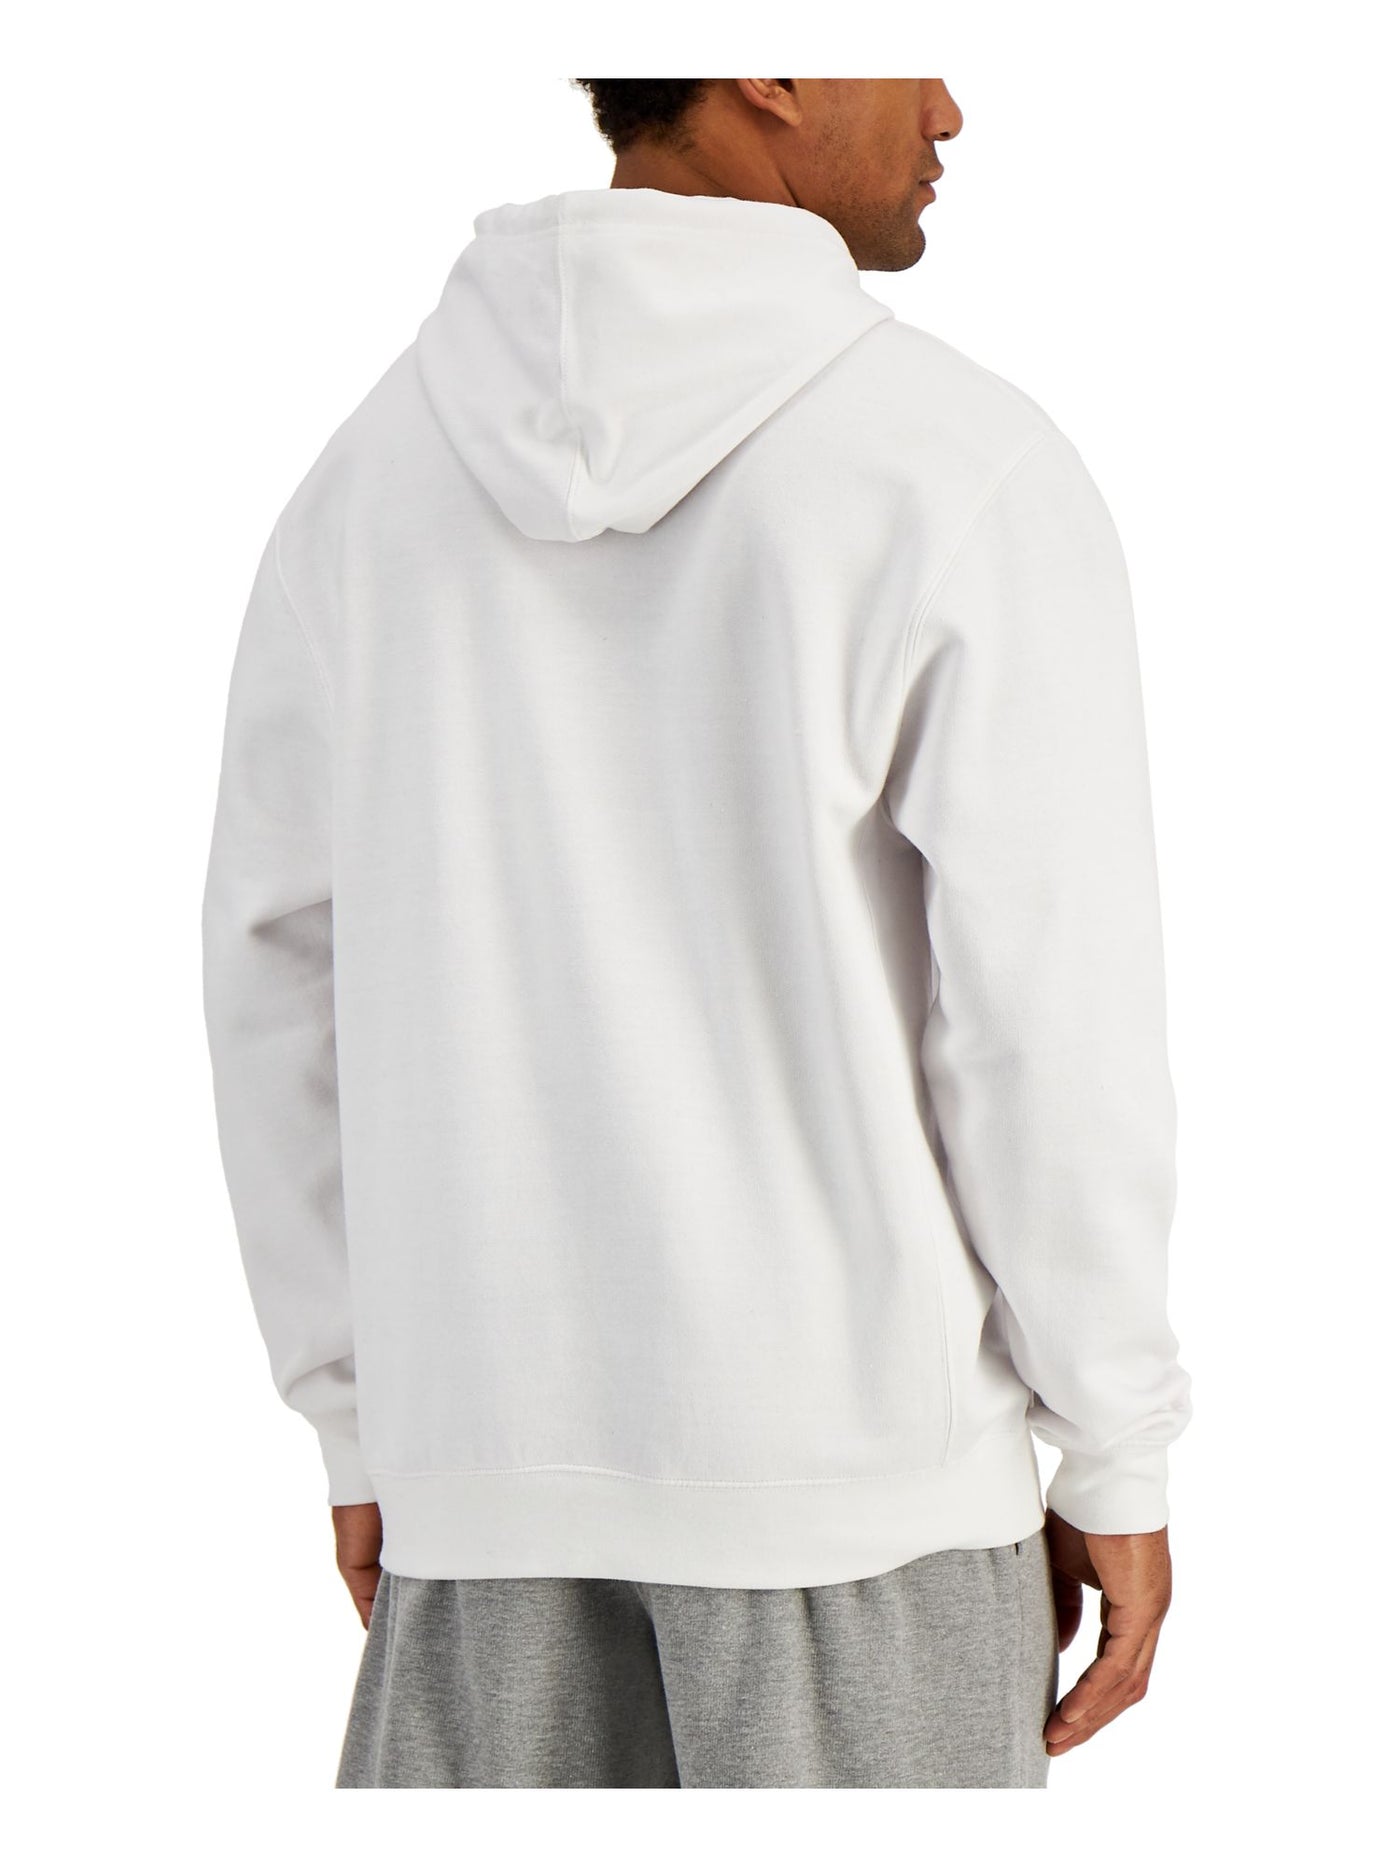 RUSSELL ATHLETIC Mens Santiago White Graphic Draw String Hoodie S